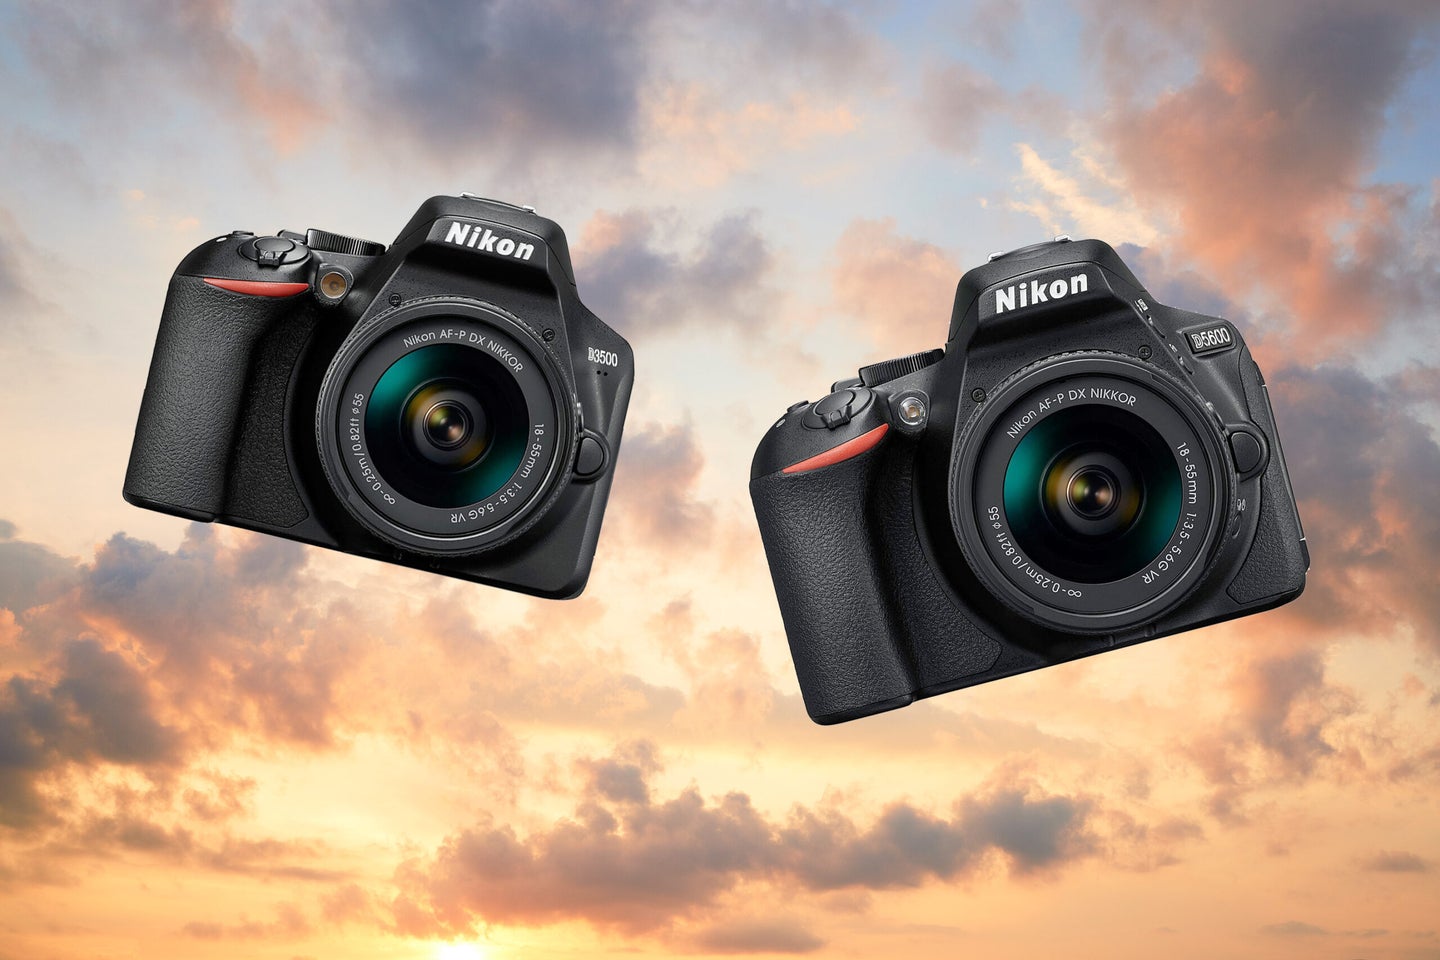 The Nikon D3500 and D5600 floating in the clouds.